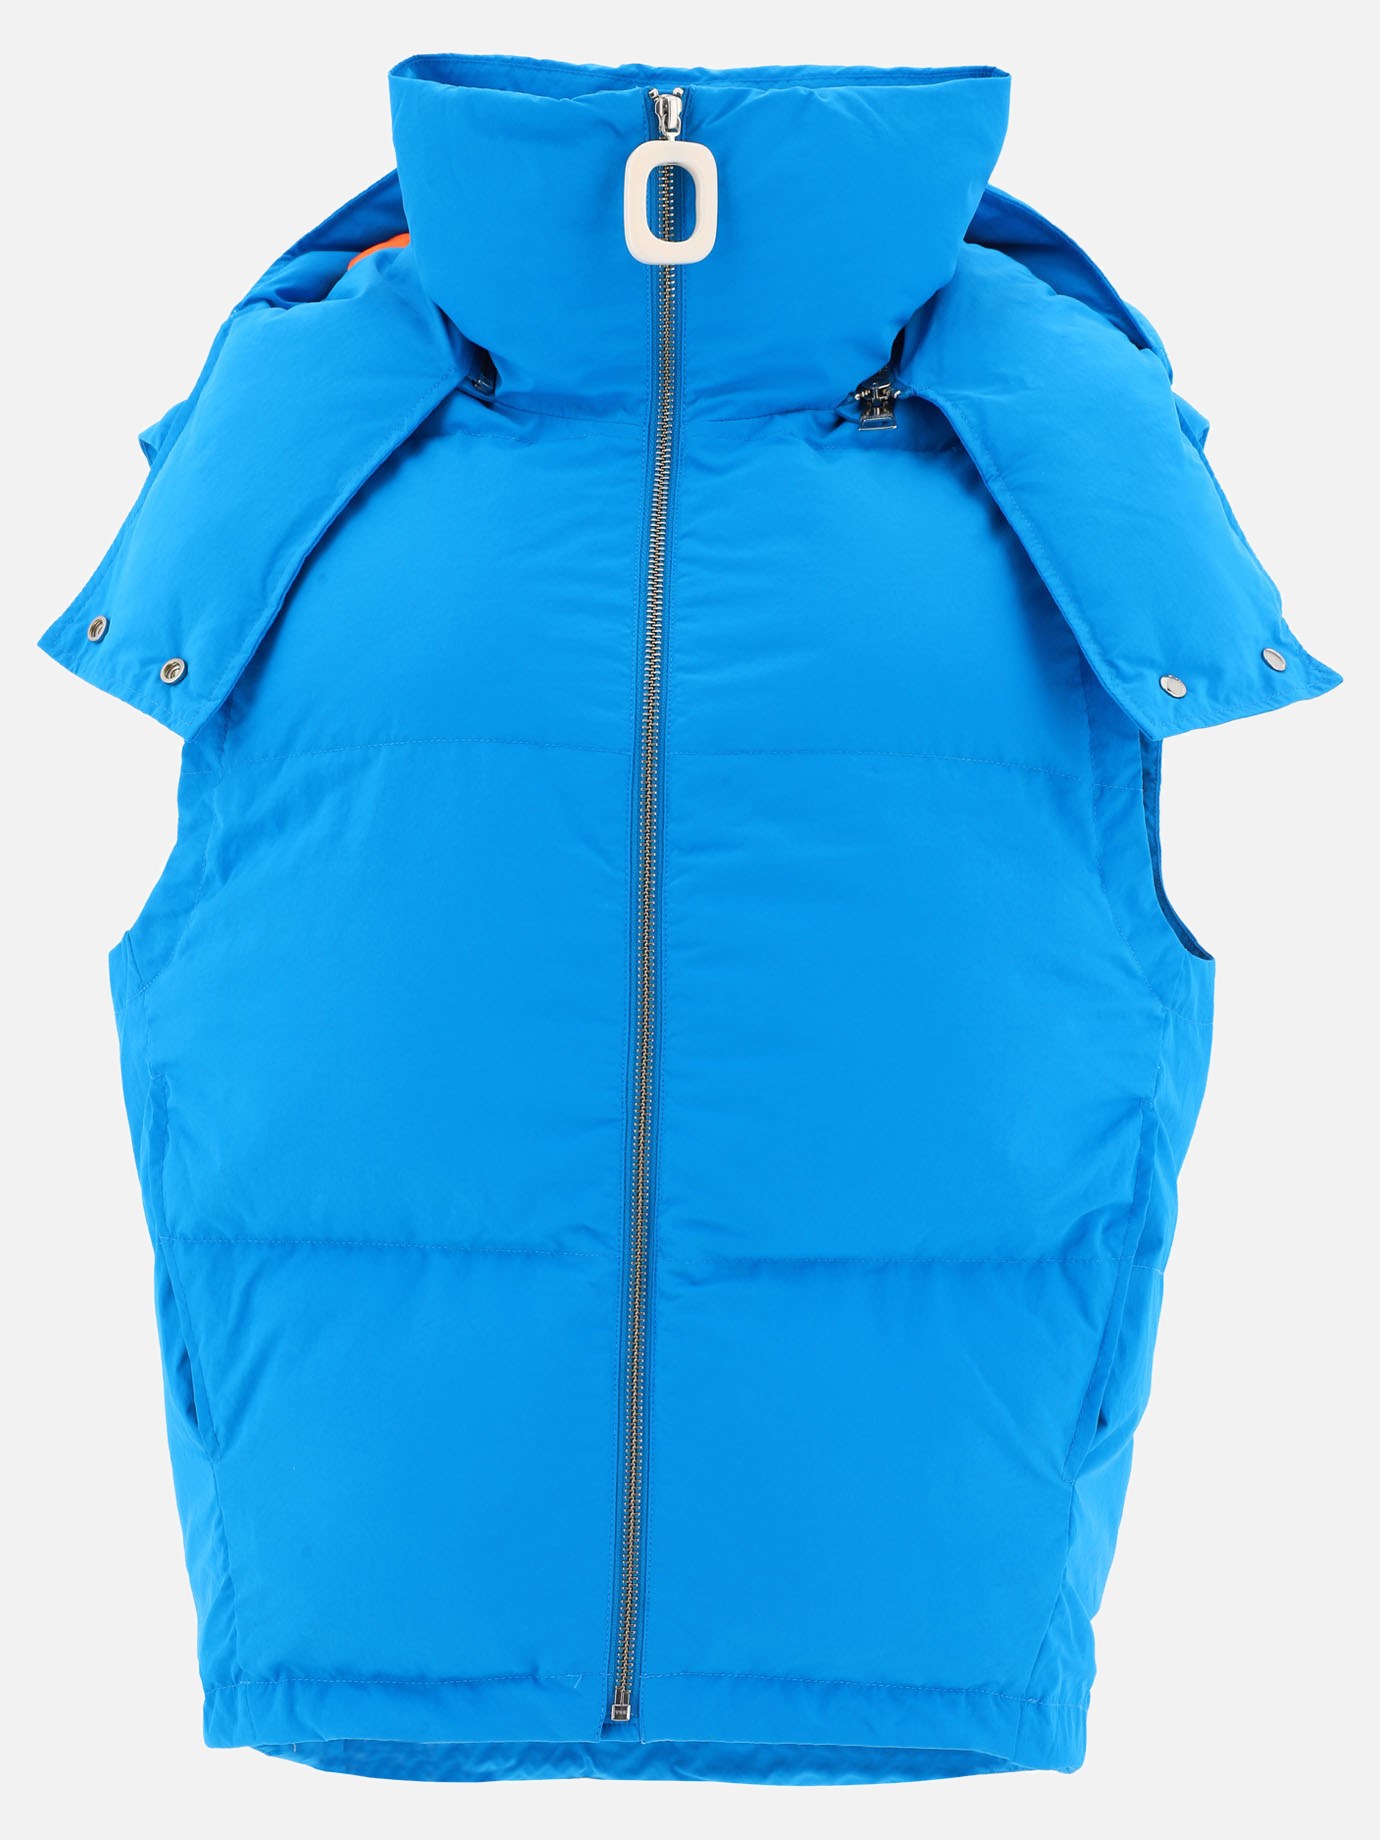  Contrast  vest jacketby JW Anderson - 1